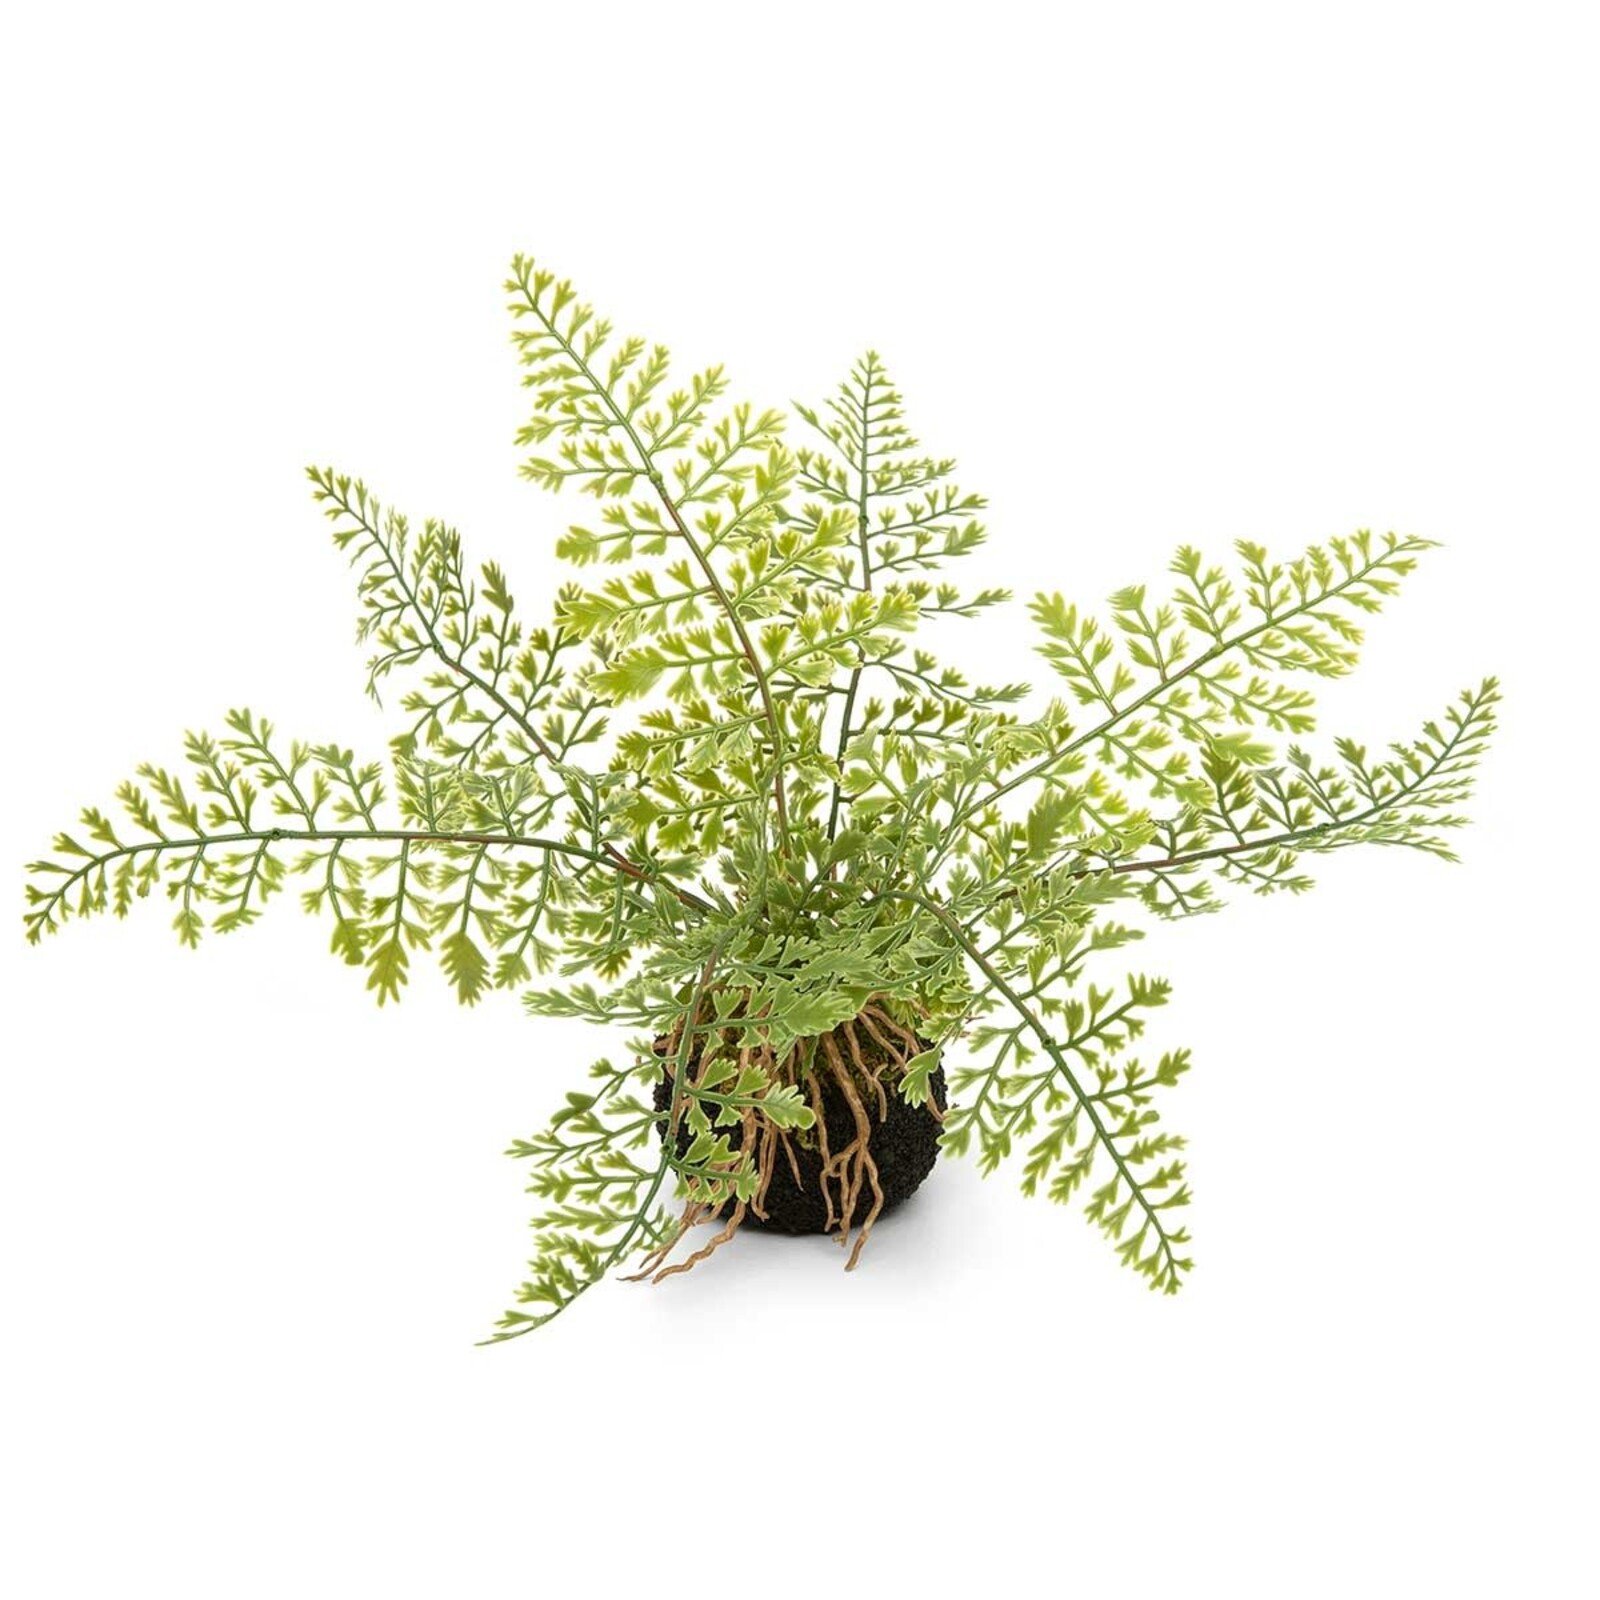 Meravic FERN MAIDENHAIR ON DIRT WITH ROOT  E2212 loading=